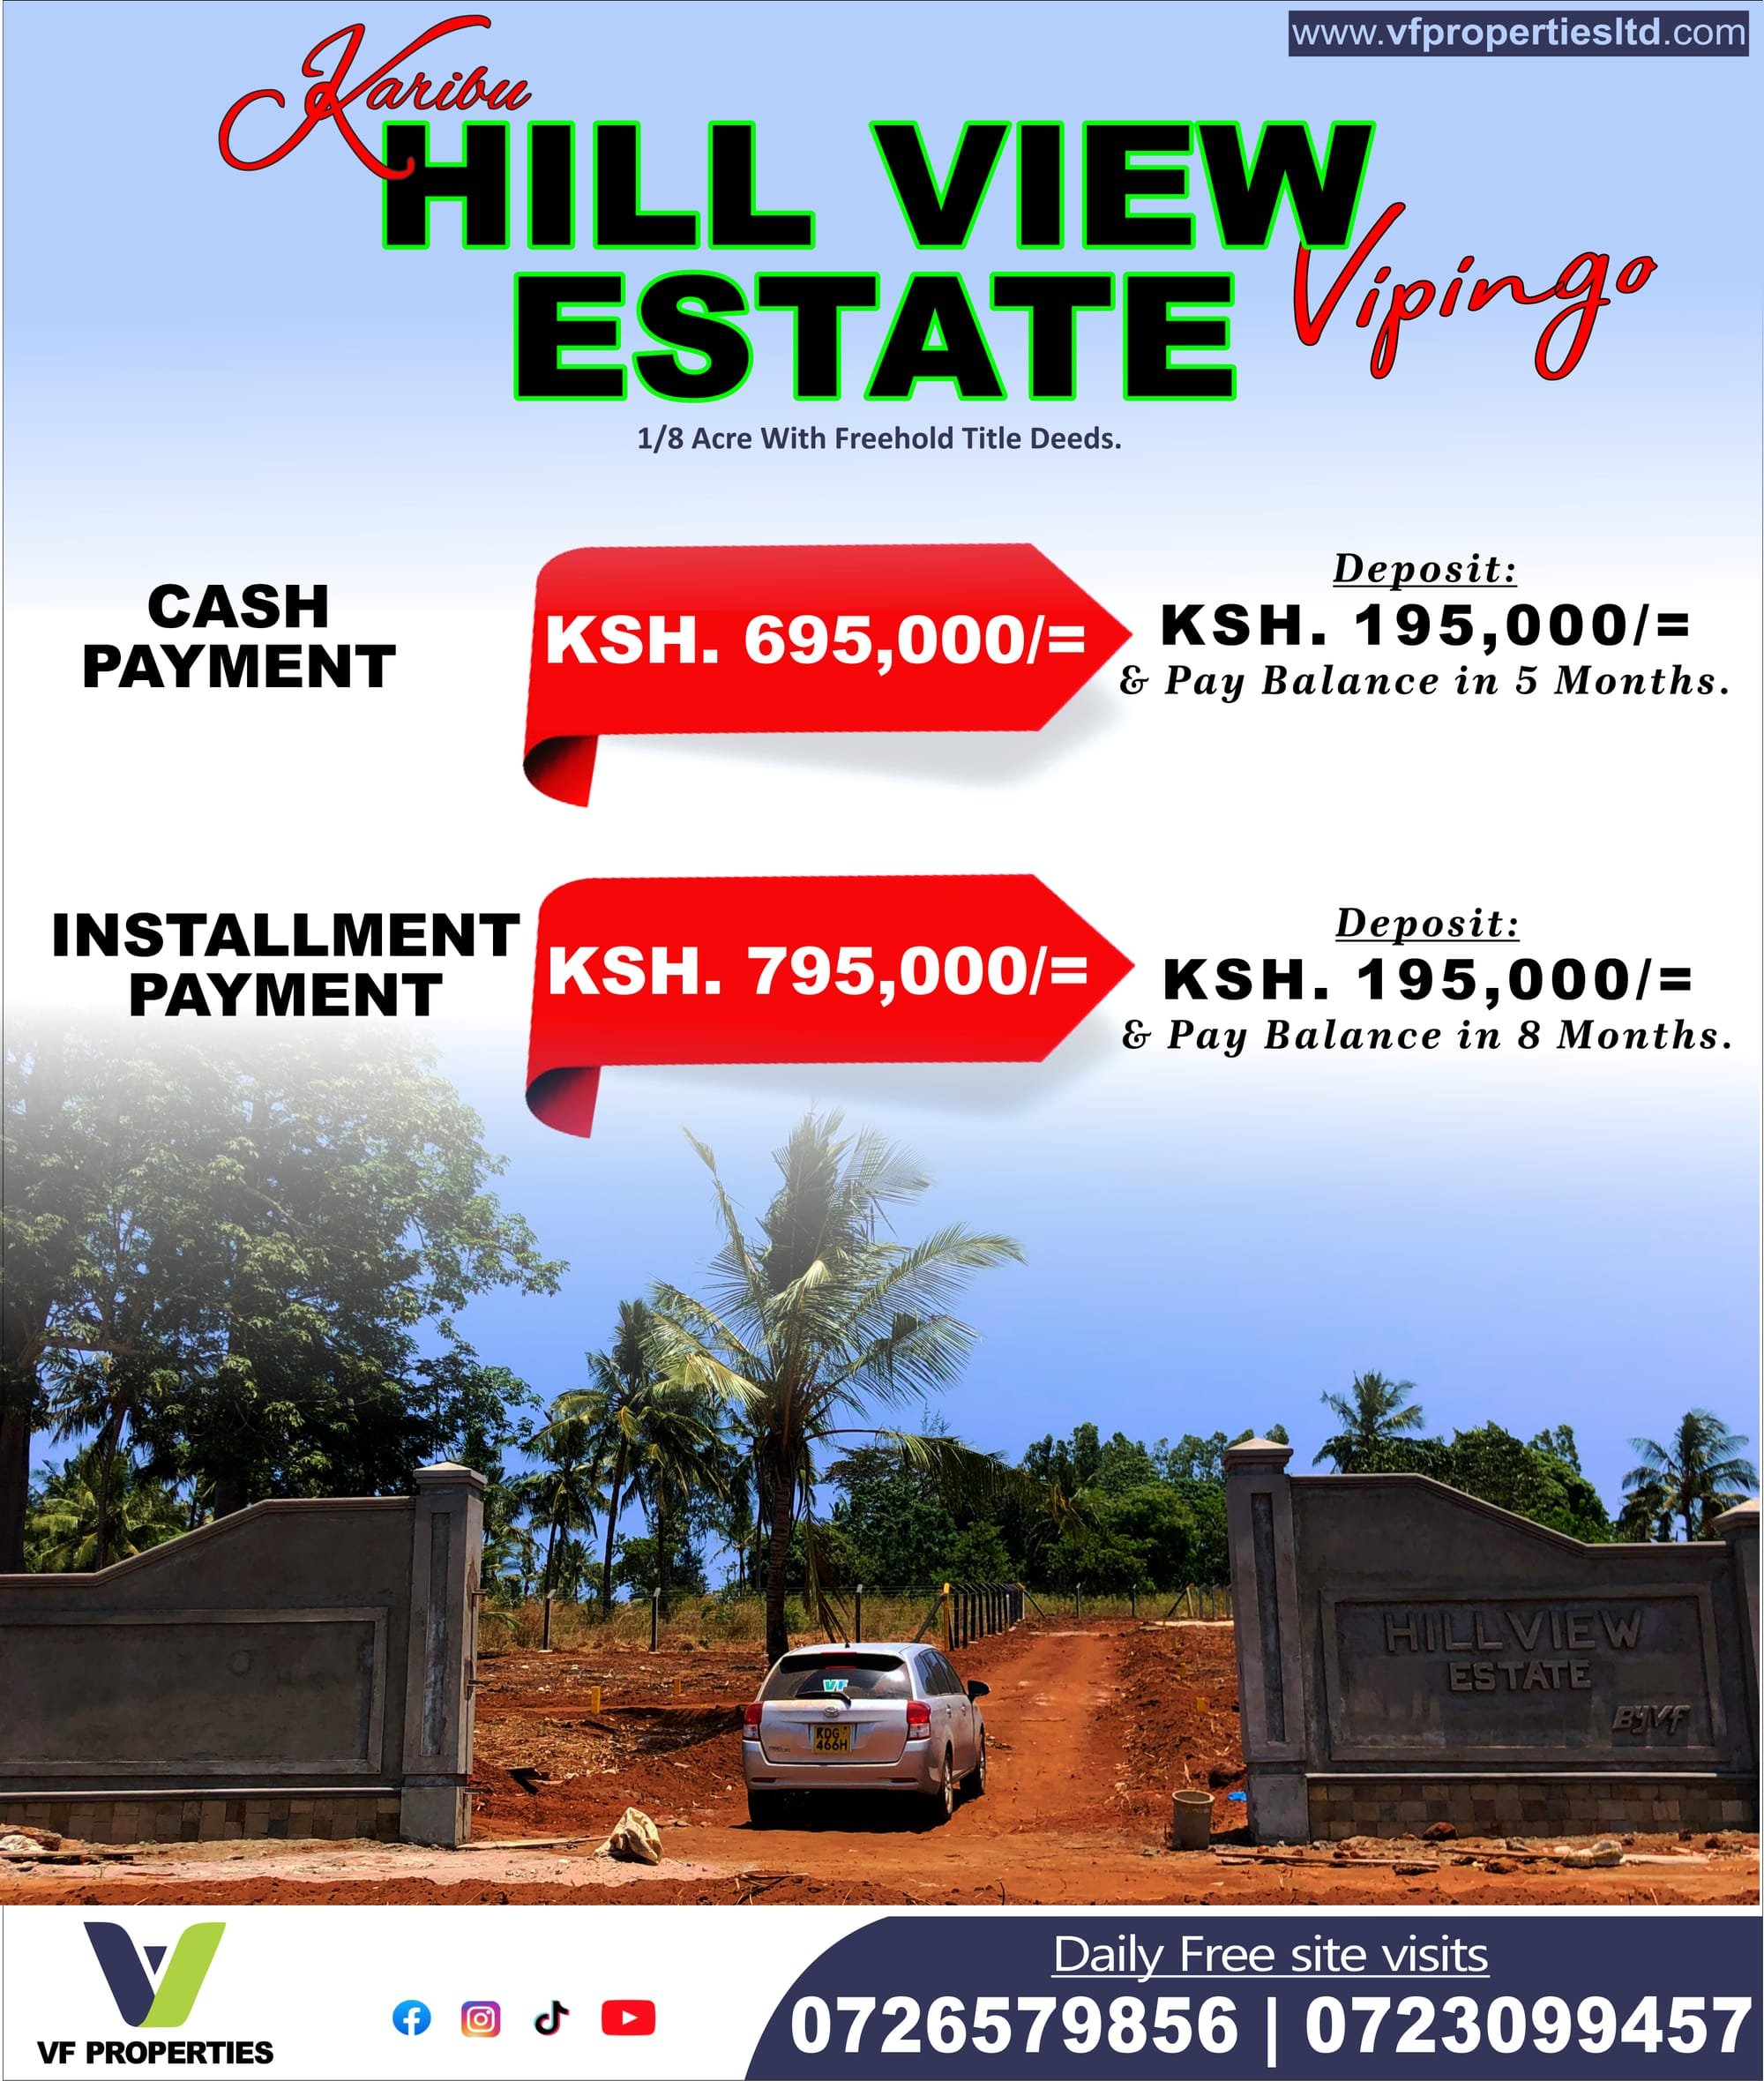 HillView Estate 1/8 acre Plots for Just Ksh. 695,000/=